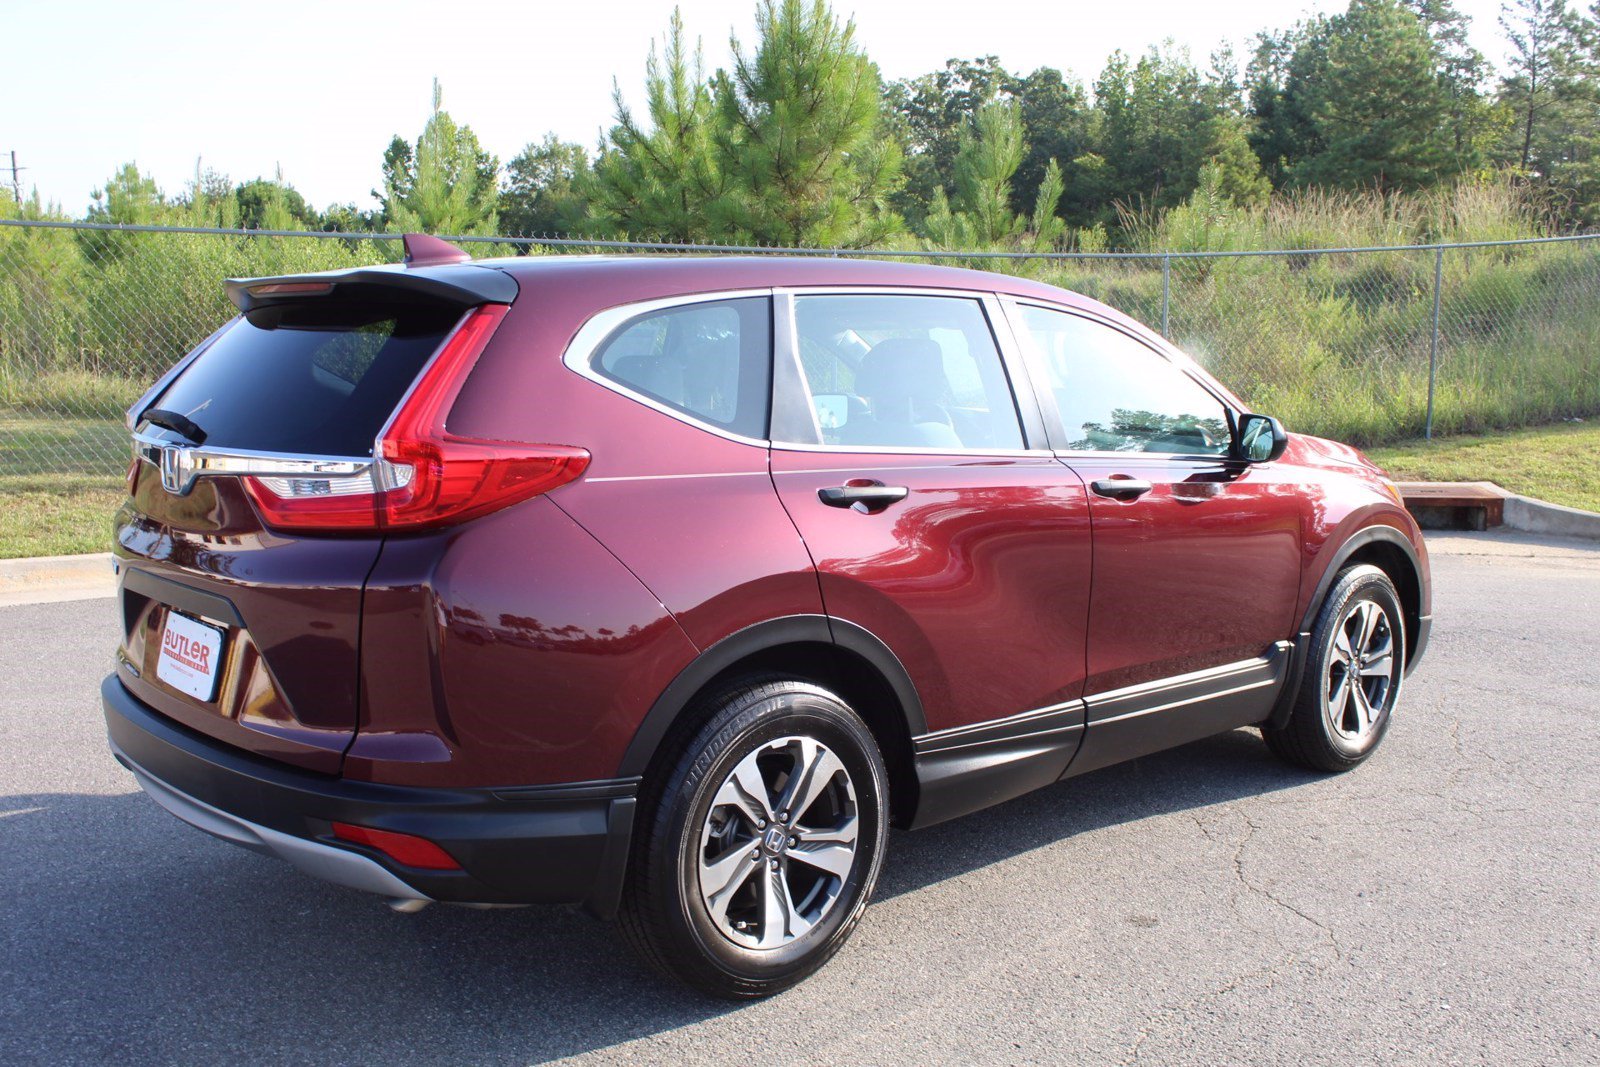 PreOwned 2018 Honda CRV LX Sport Utility in Milledgeville H20107A